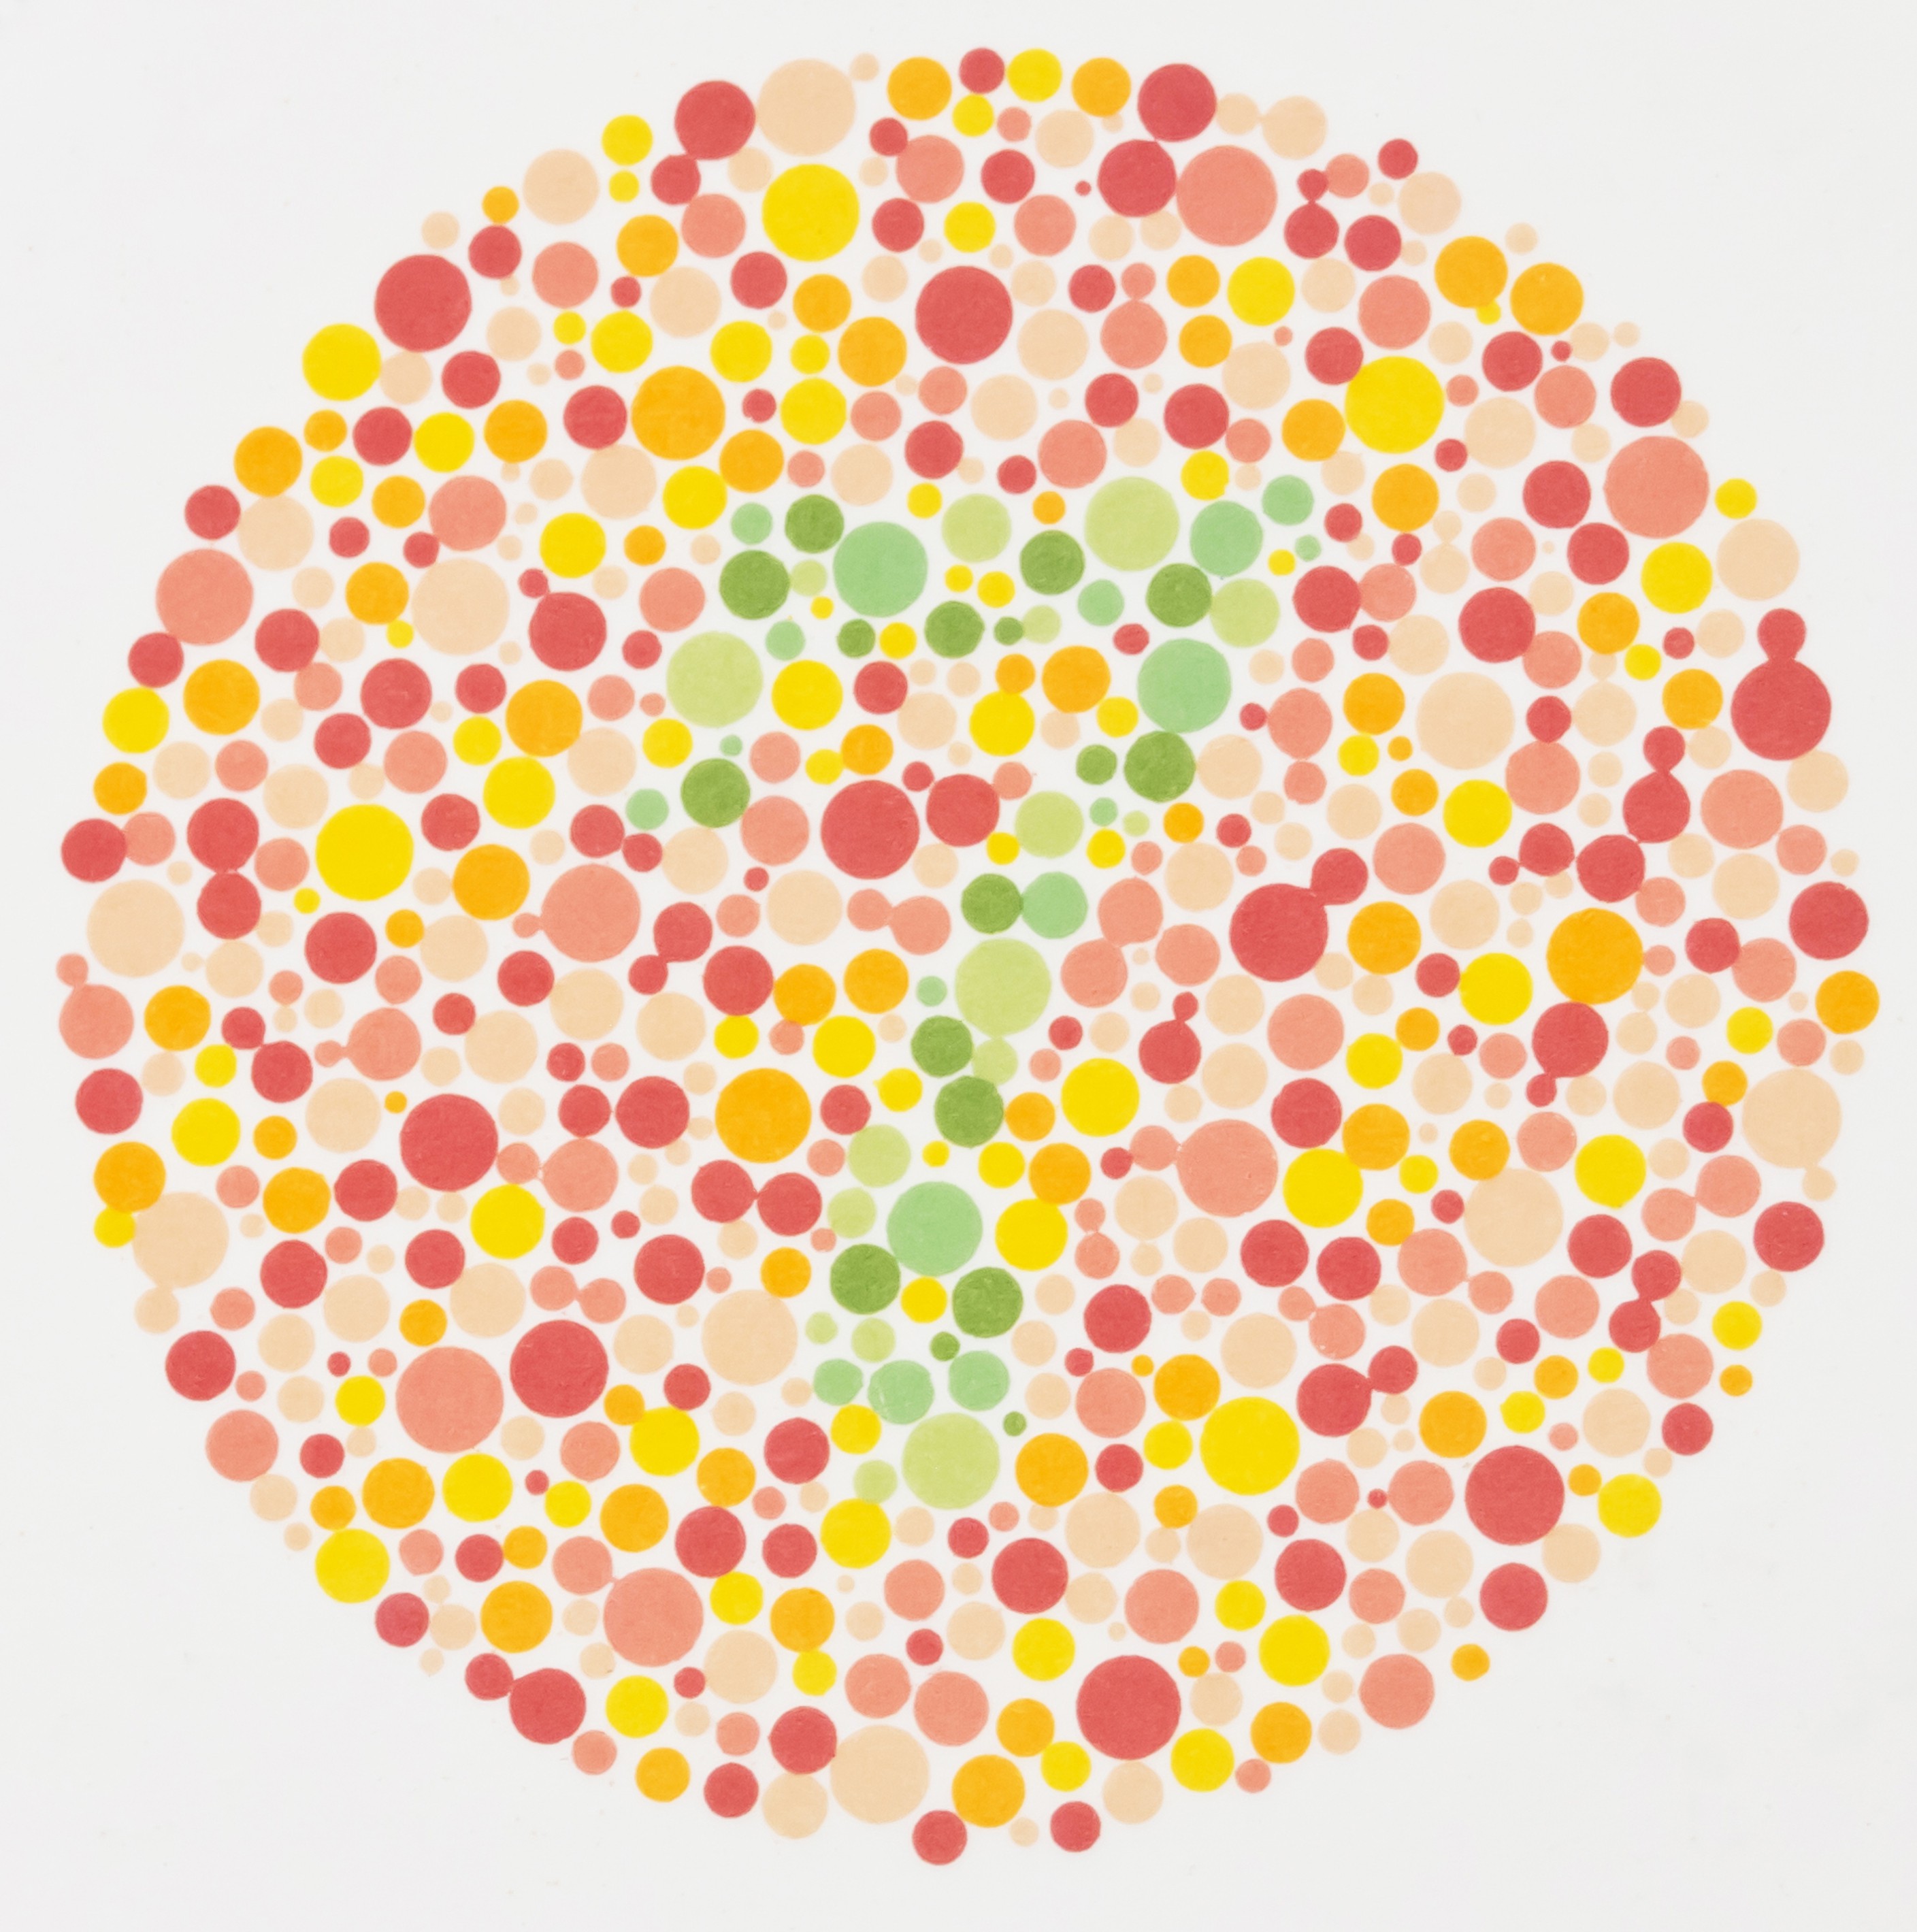 How Can We Know if an Animal Is Color Blind